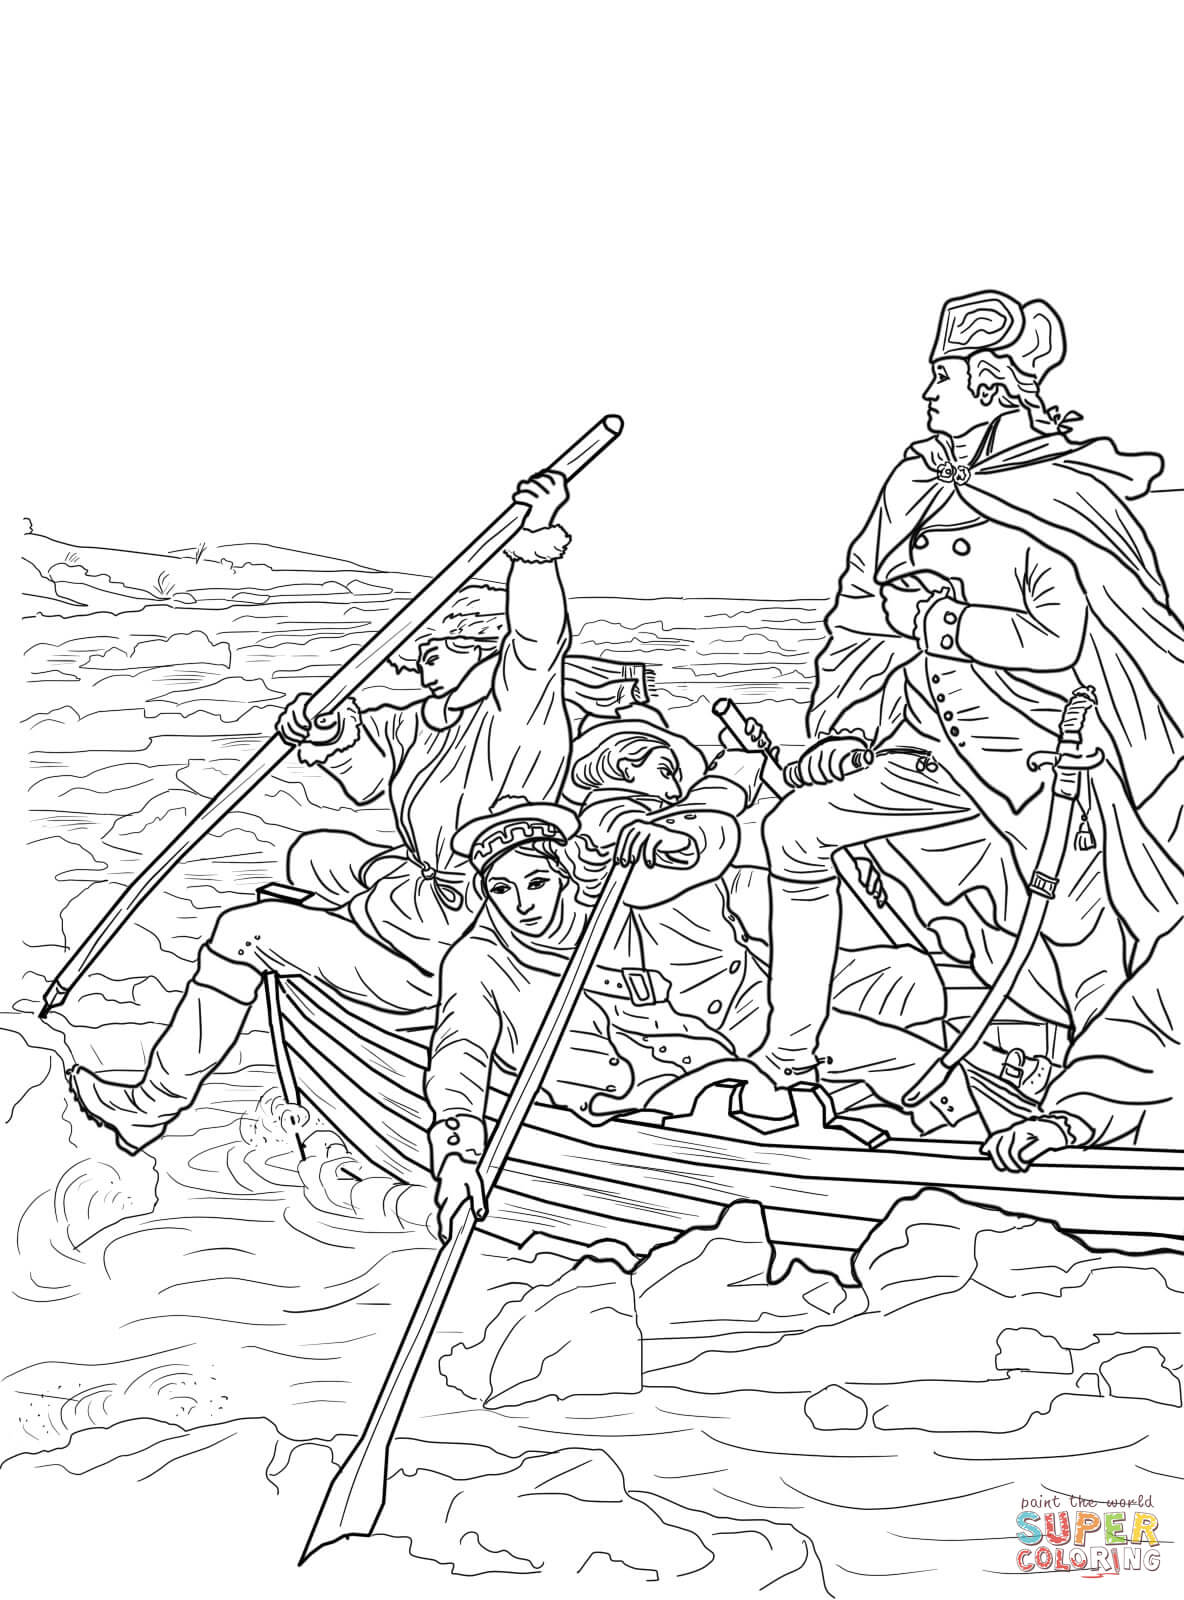 American Revolution Coloring Pages at GetColorings.com | Free printable